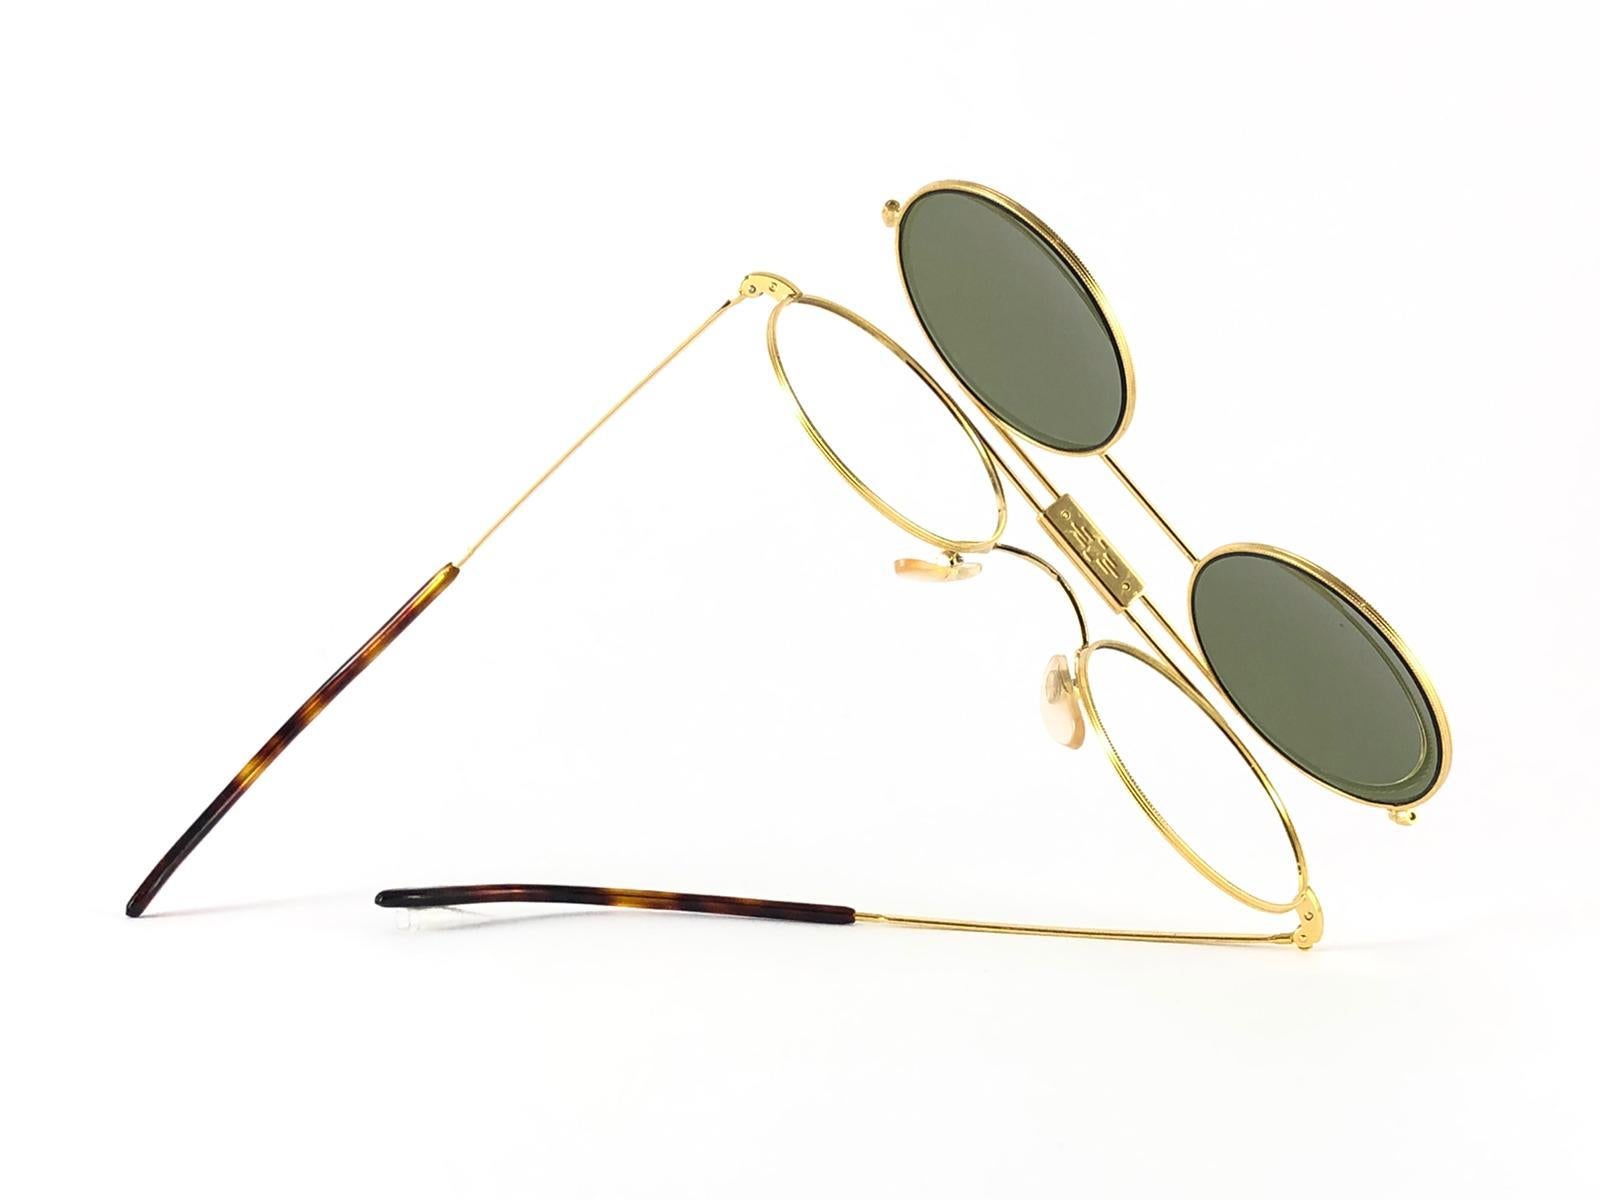 New Vintage Anglo American Optical Gold M85 Flip Top Sunglasses 1960'S For Sale 6